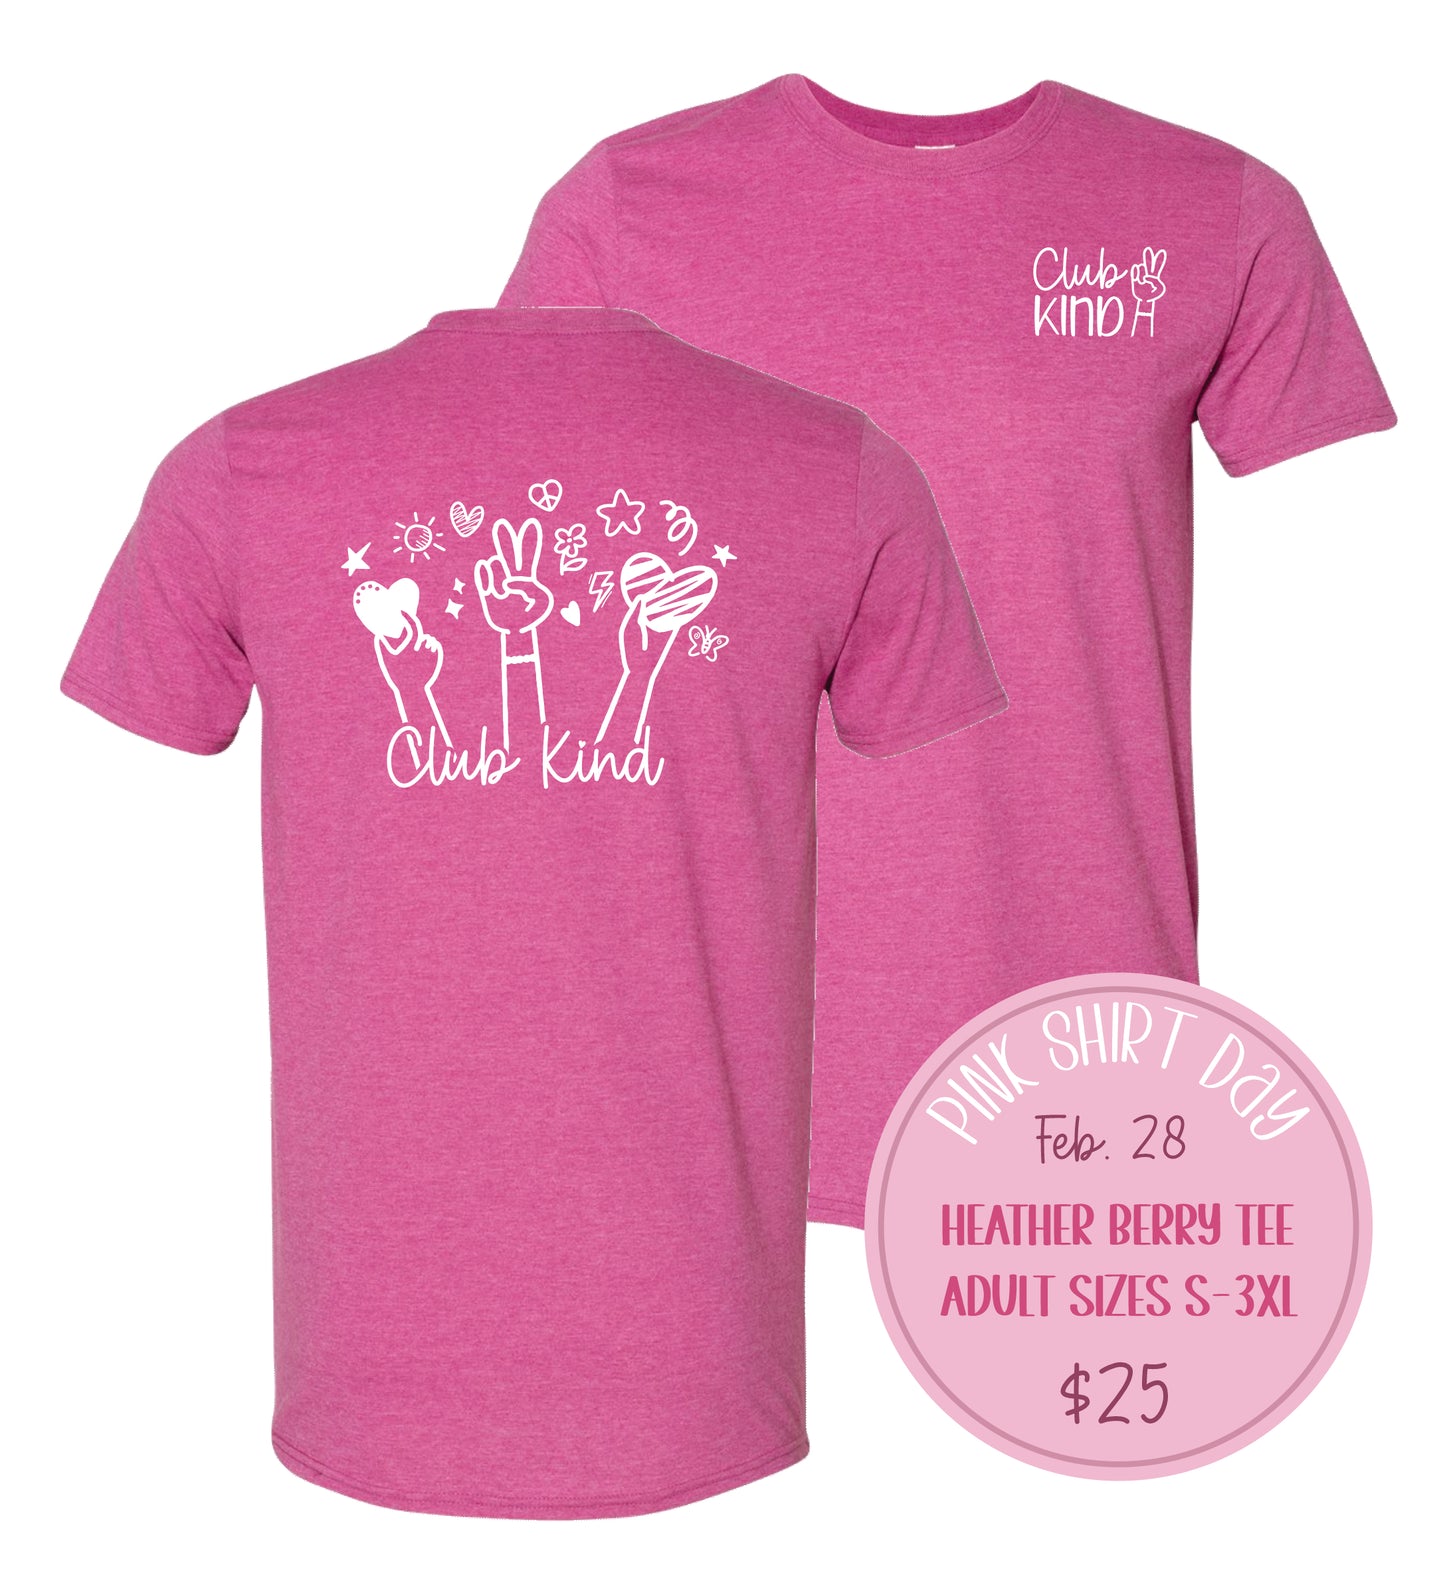 Club Kind Heather Berry Adult Unisex Pink Shirt Day